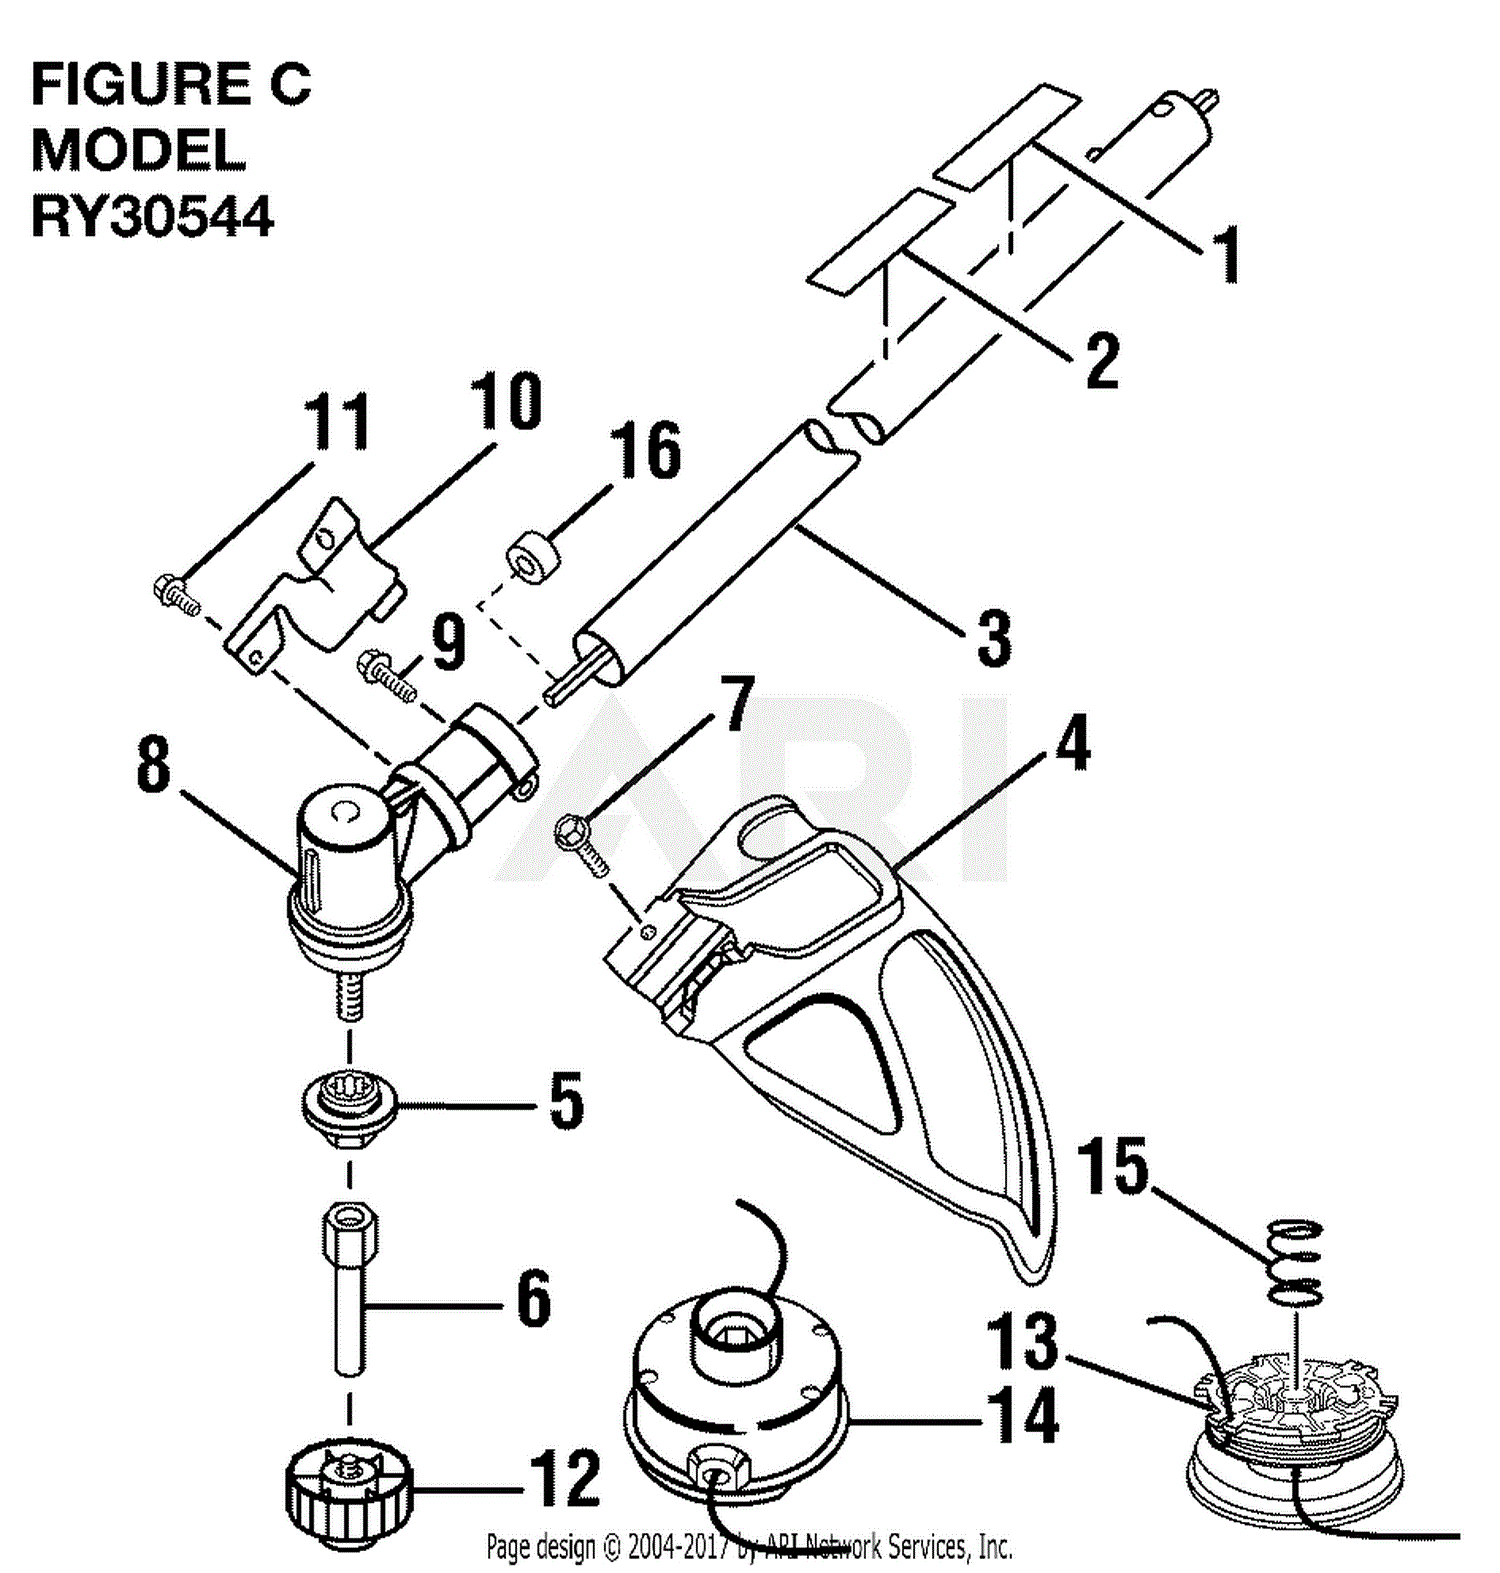 Homelite RY30544 30cc String Trimmer Parts Diagram for Figure C